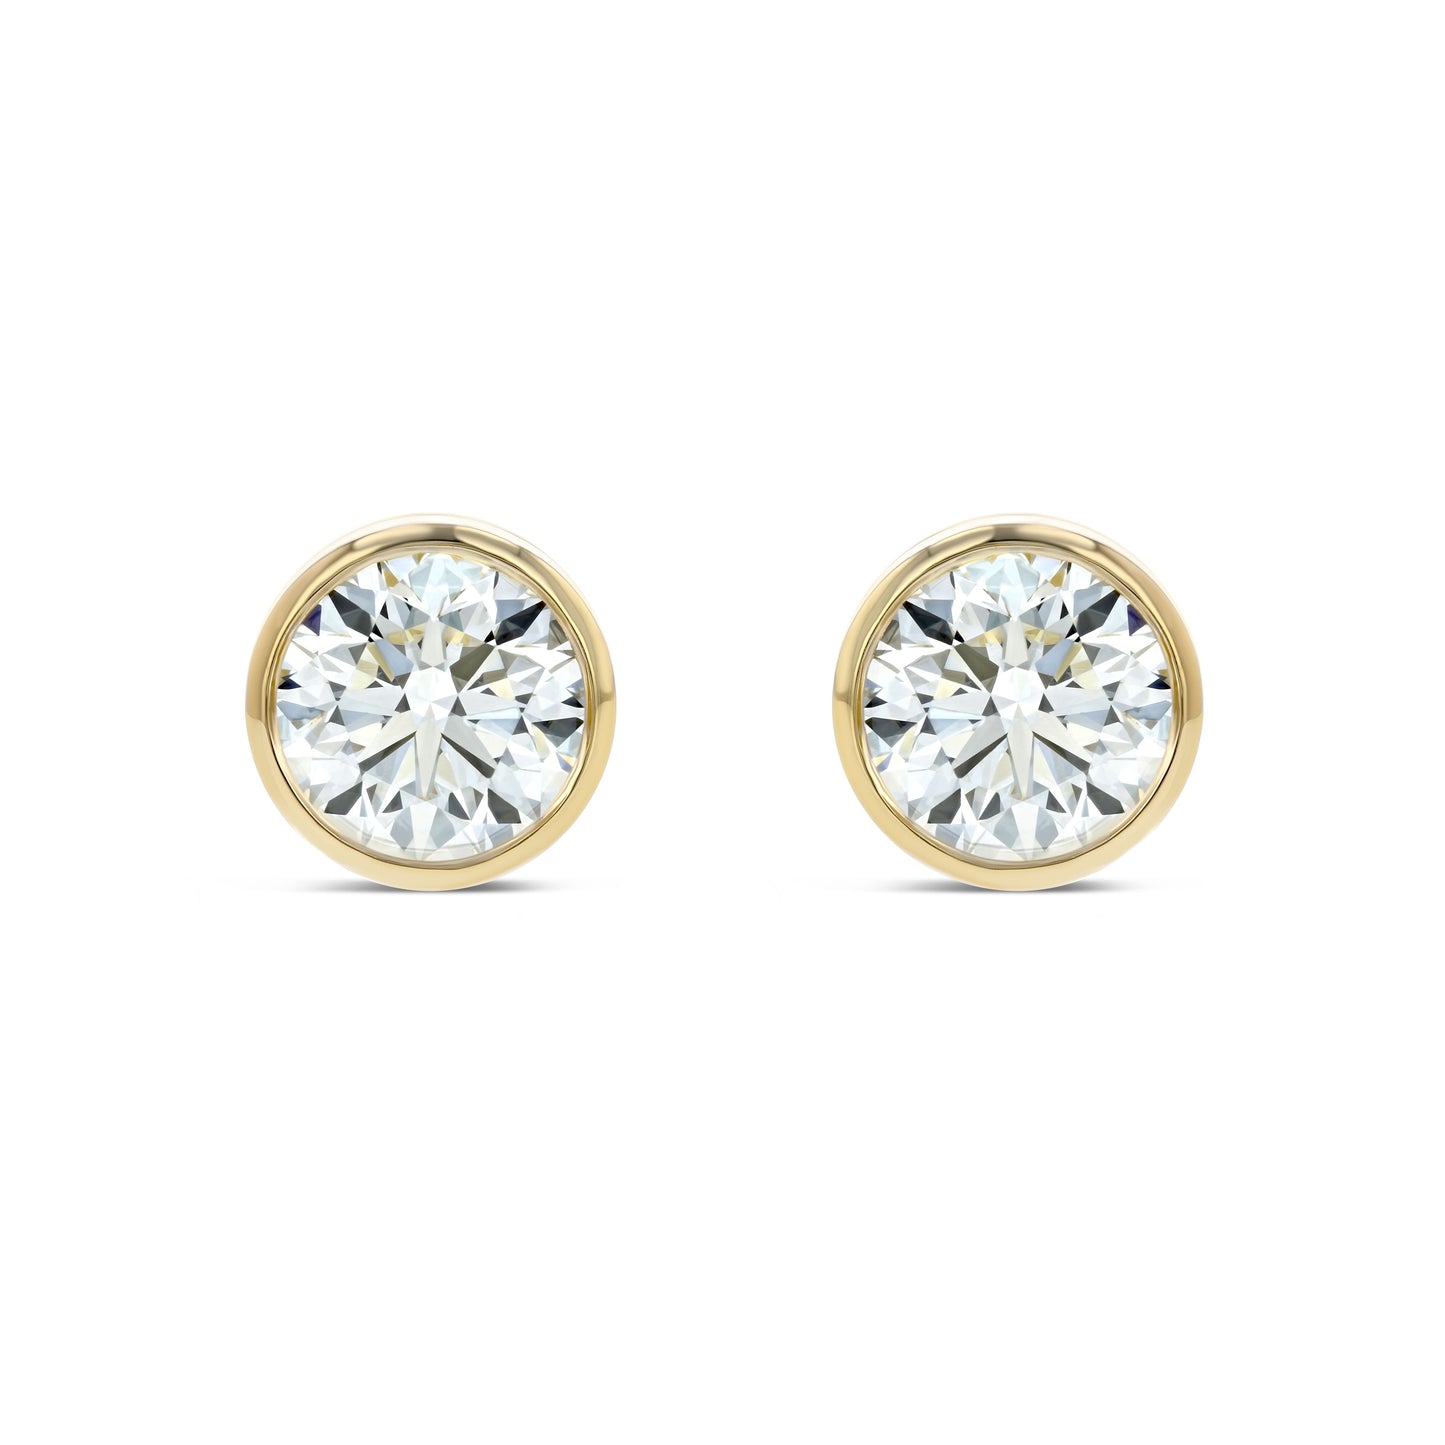 18k Yellow Gold Bezel Set Round Brilliant Diamond Stud Earrings (2.09 Ct. T.w., Si1-si2 Clarity, H-i Color)